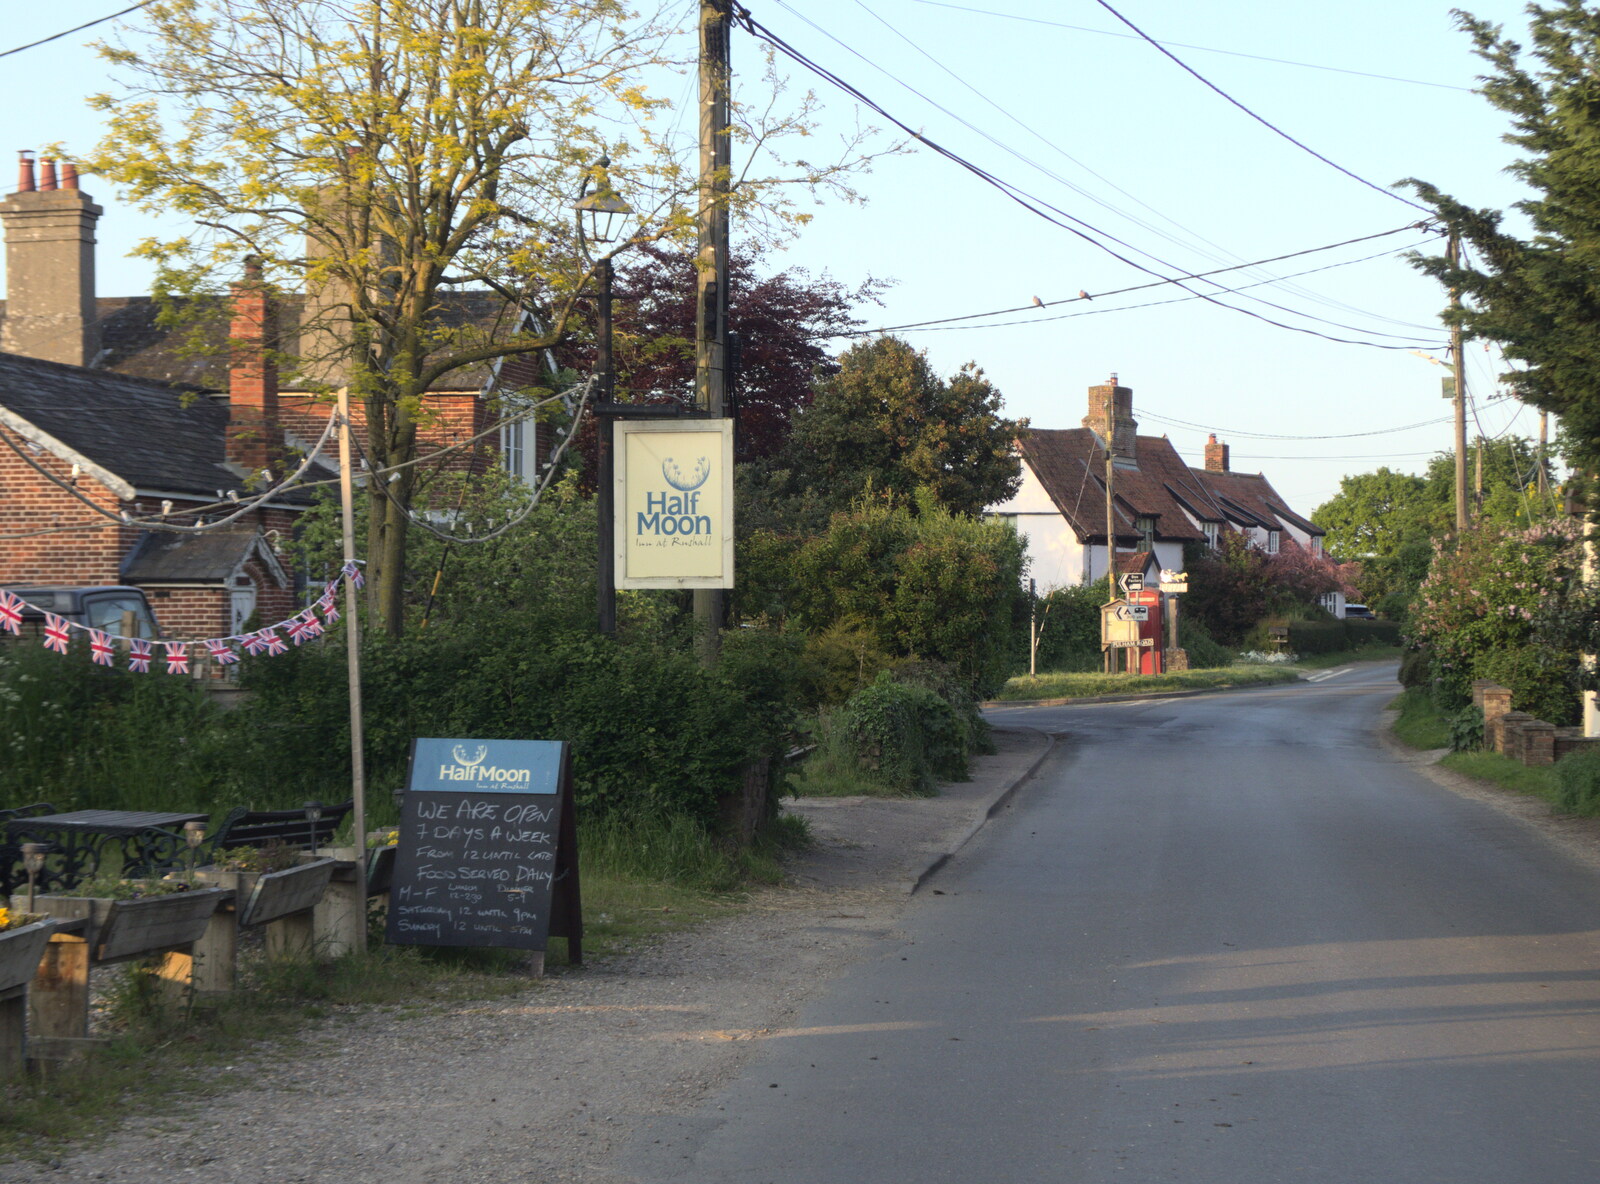 The main street through Rushall from The BSCC at Rushall, South Lopham and Redgrave - 25th May 2023